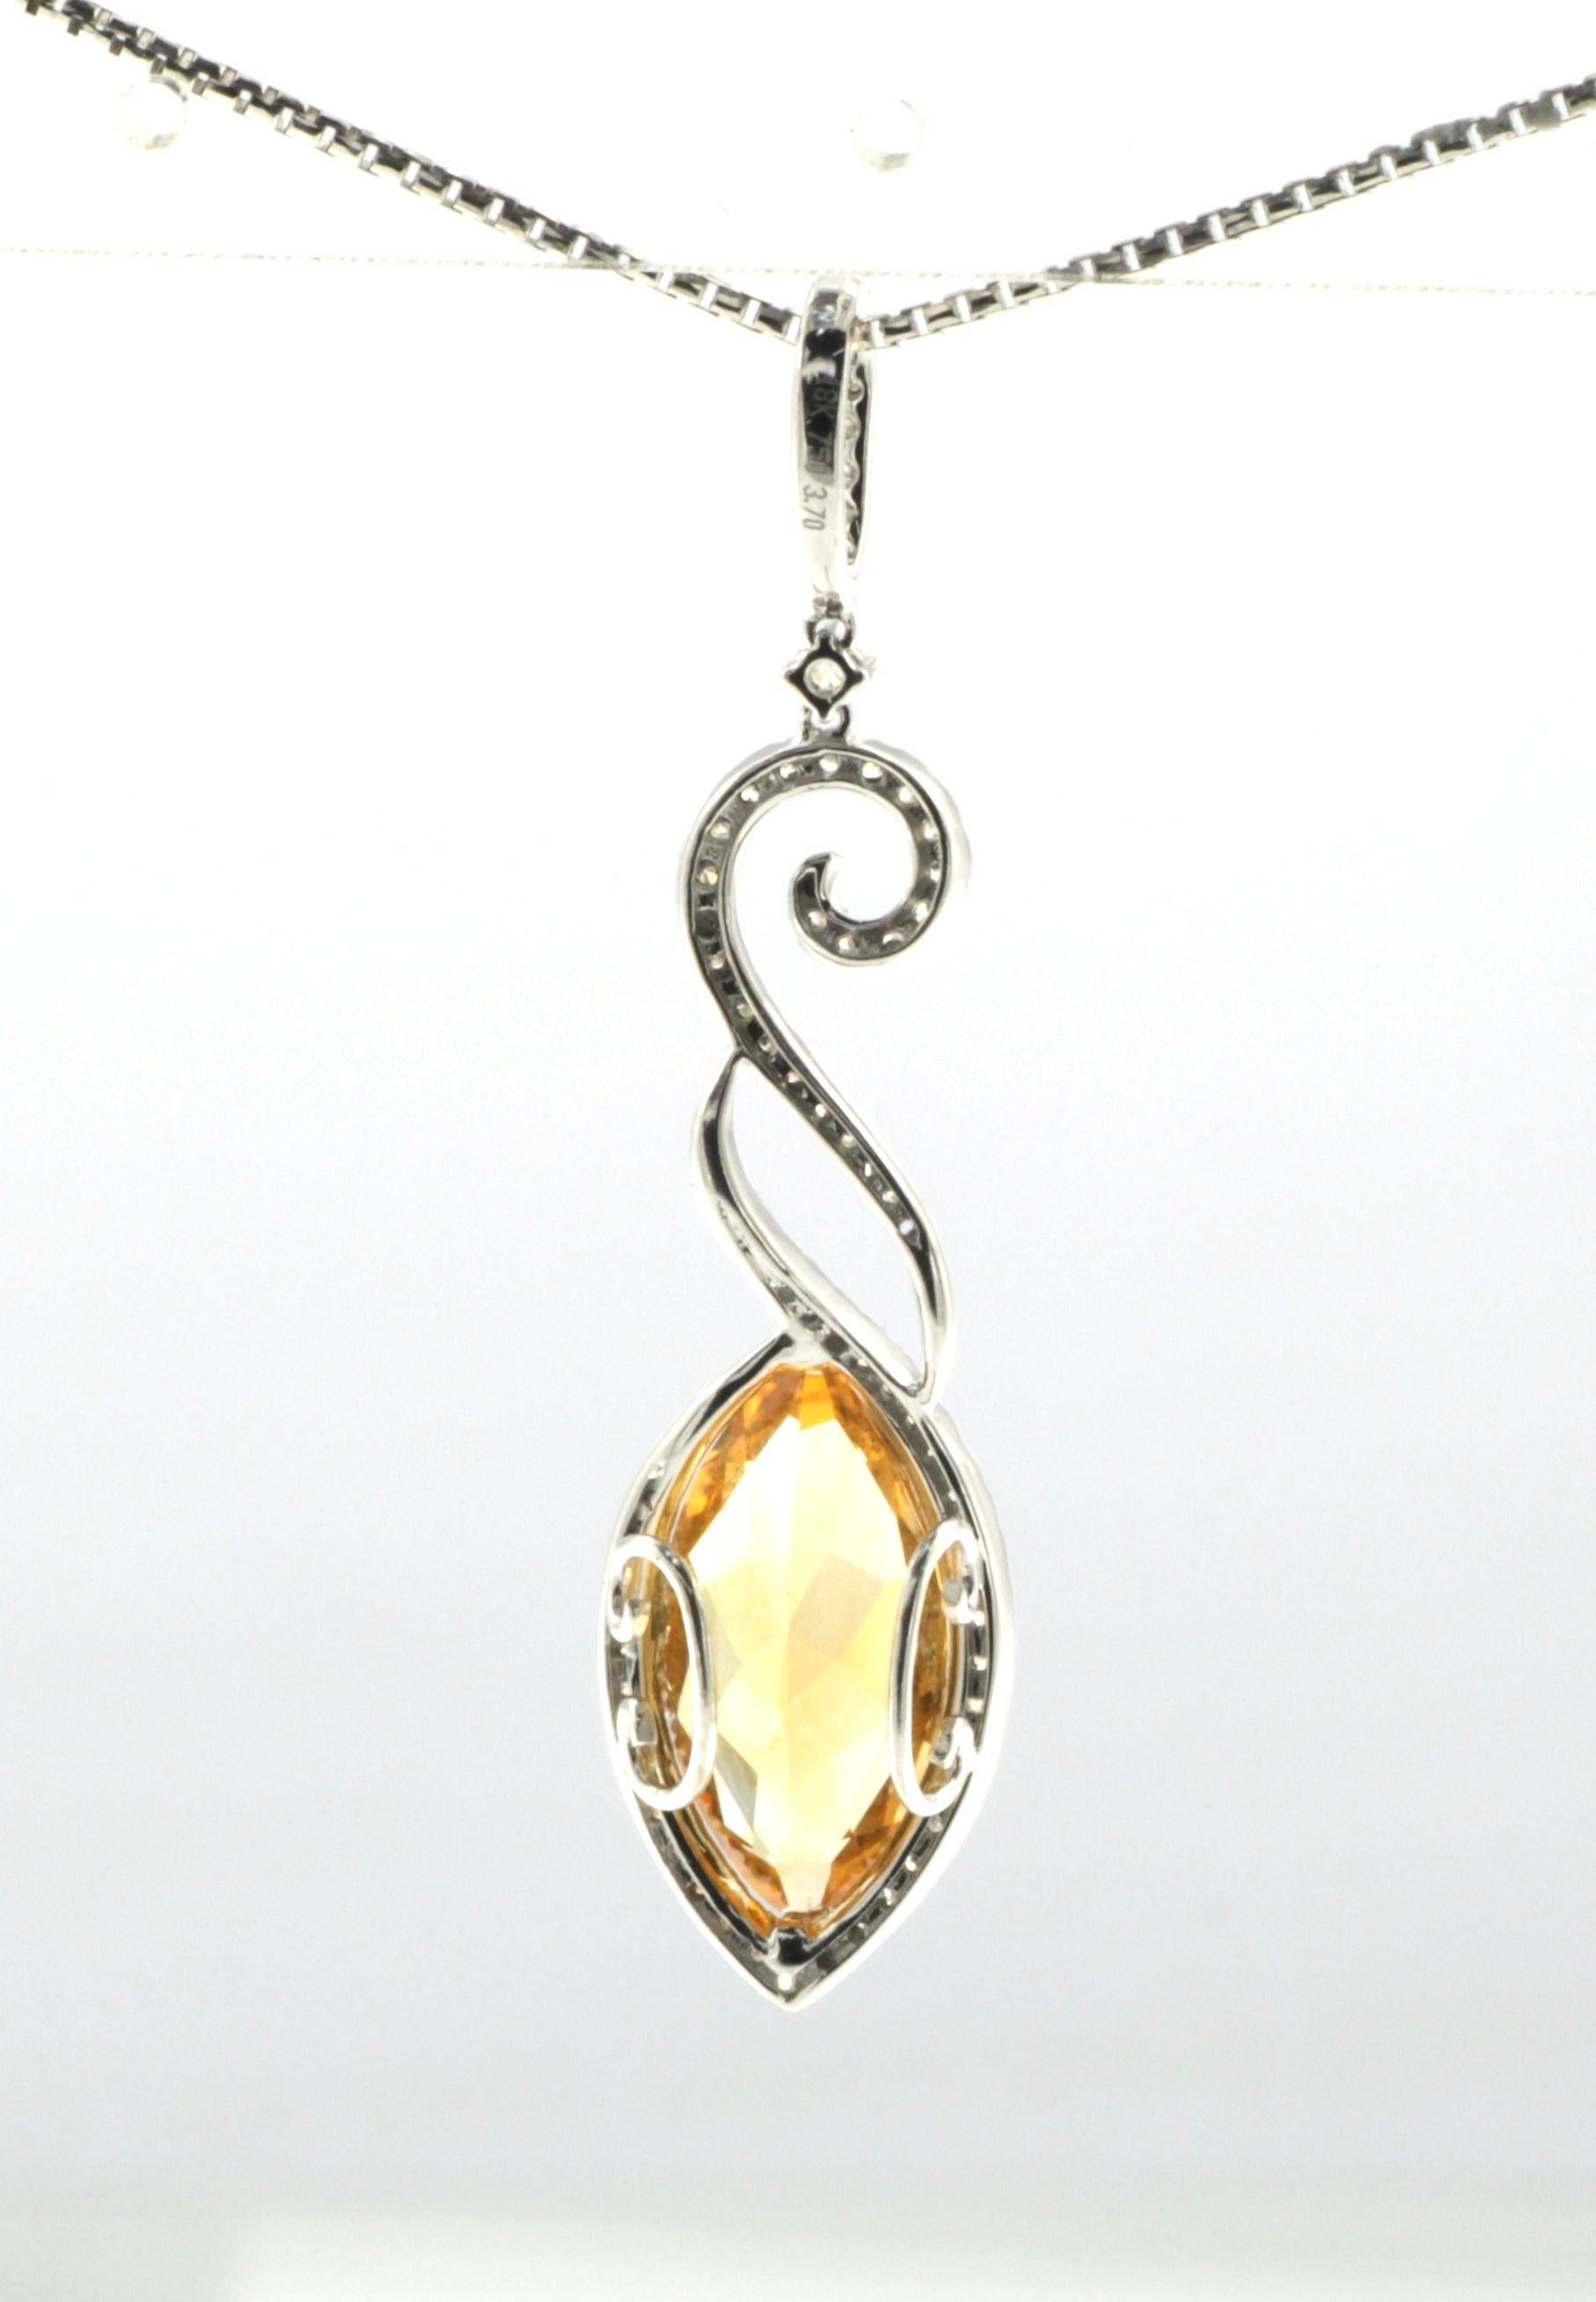 Discover elegance with our stunning pendant, featuring a 3.70-carat marquise-shaped citrine, surrounded by 0.50 carats of white brilliance cut diamonds. The golden citrine is perfectly accented by the sparkle of the diamonds, creating a harmonious